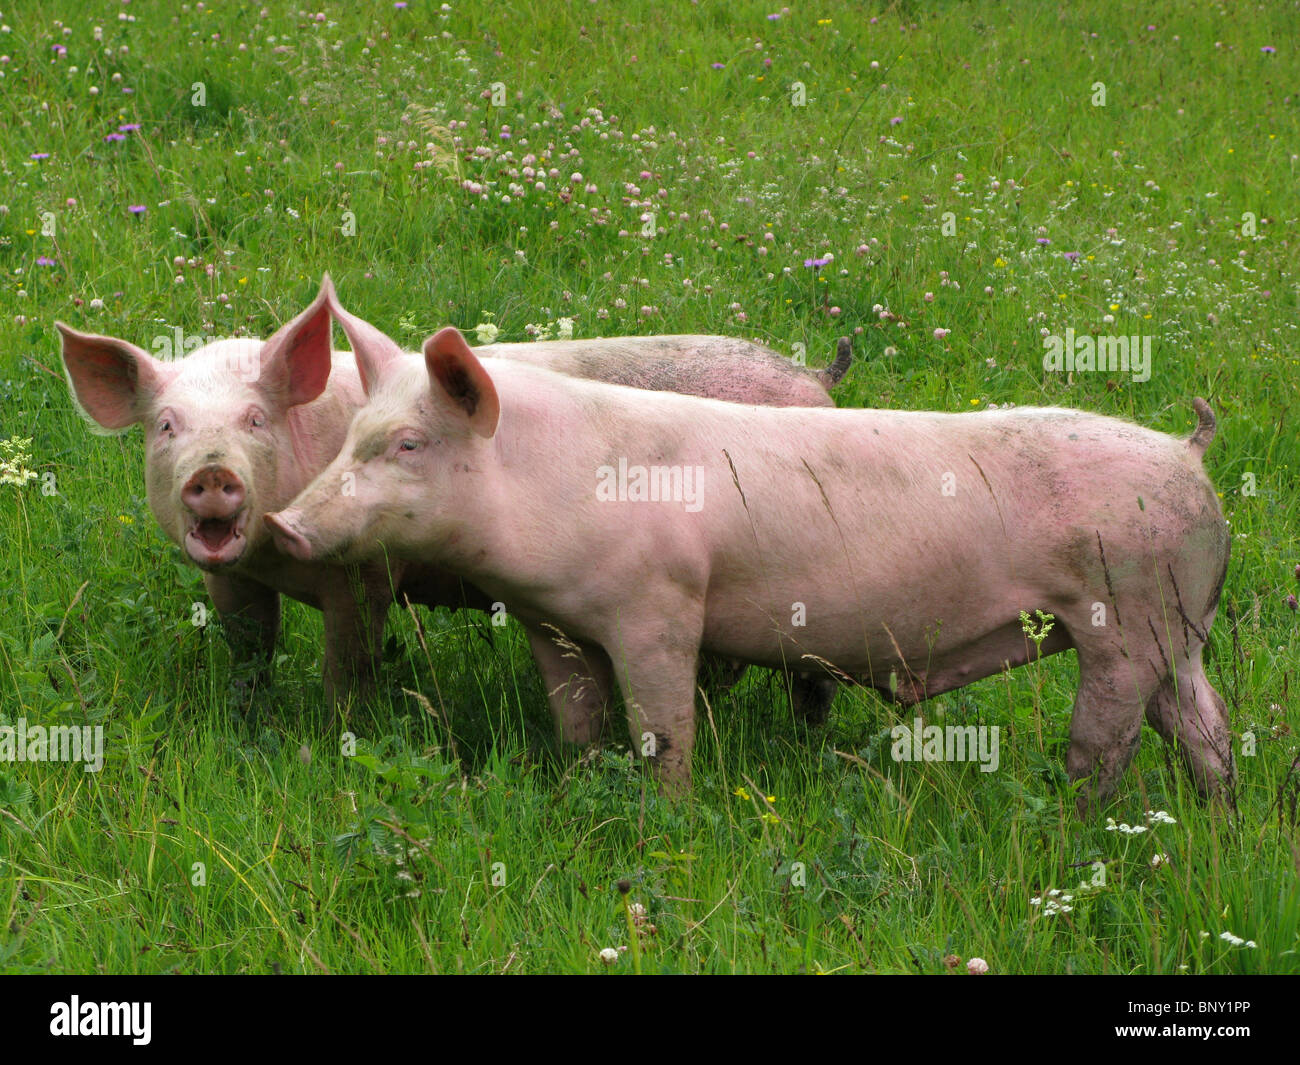 Pigs, pig, pigs outdoors in a field, free range pigs Stock Photo